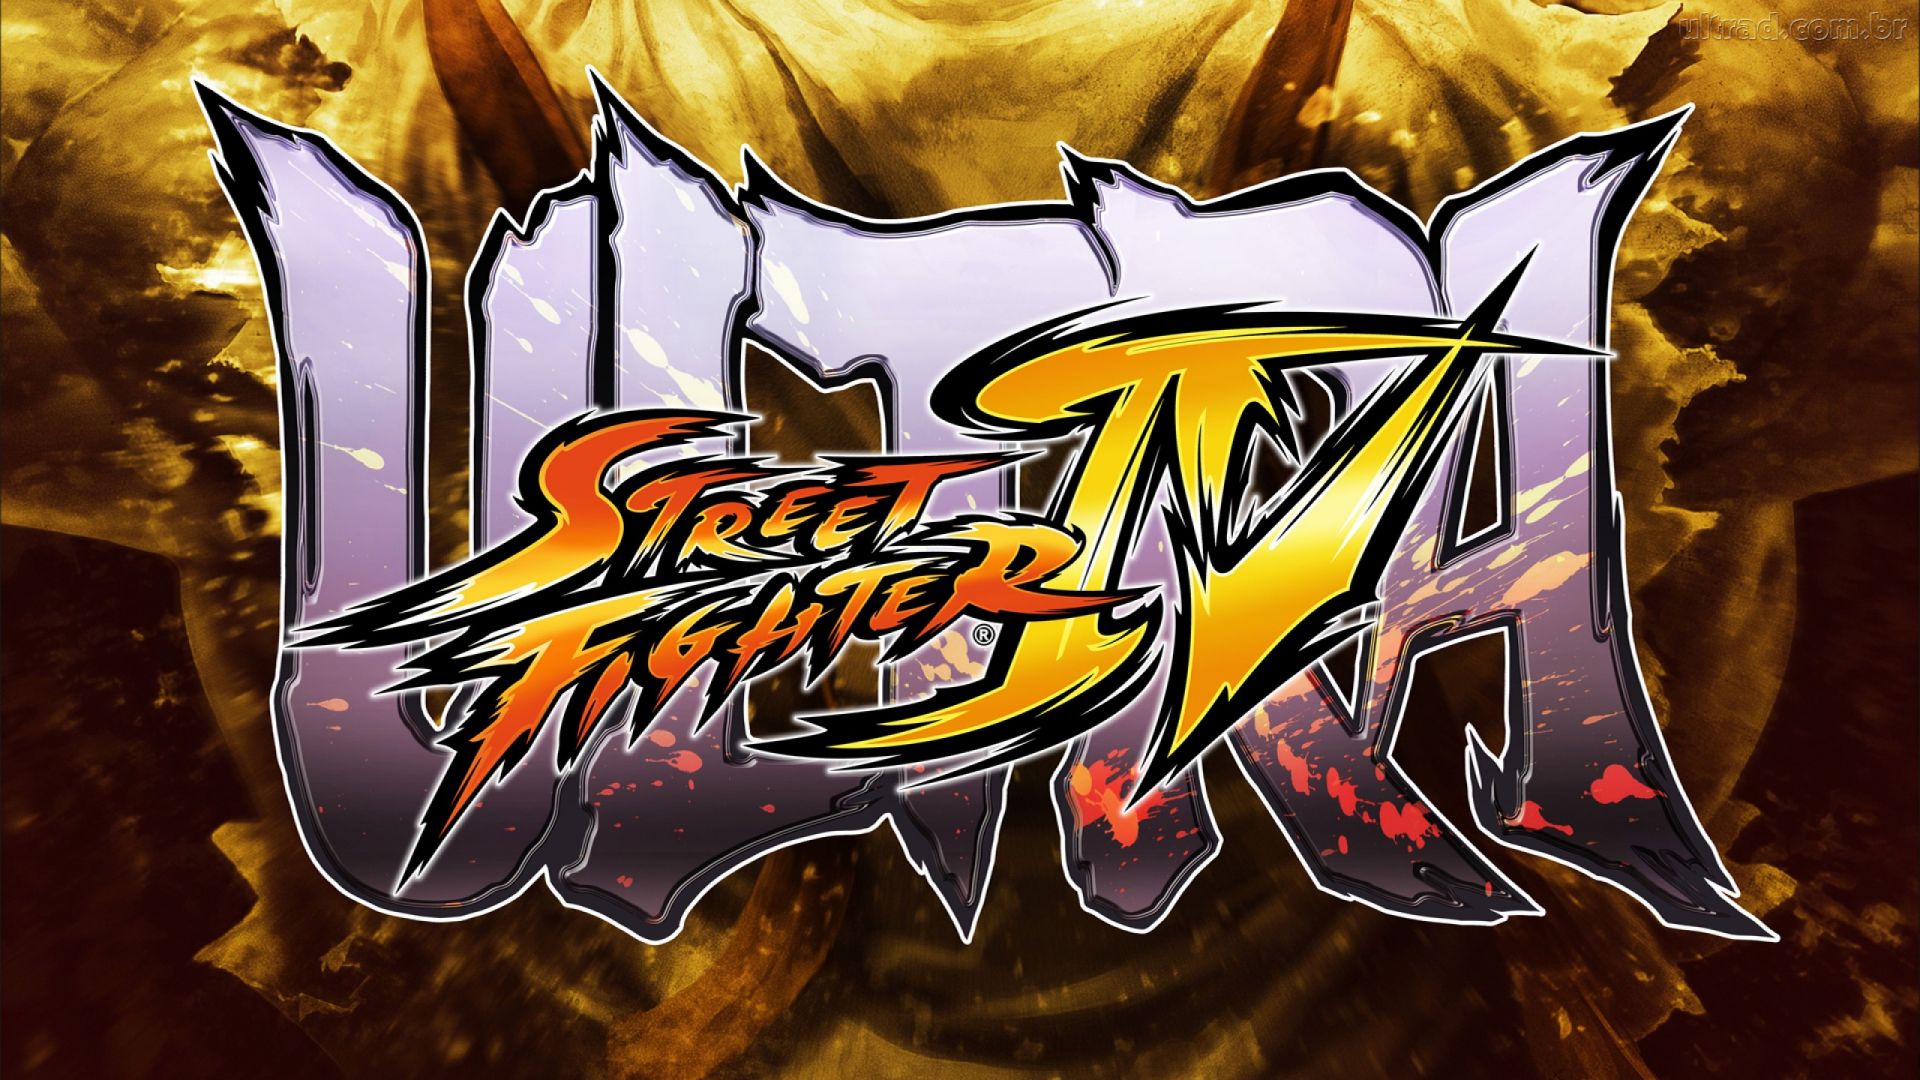 1920x1080 > Ultra Street Fighter IV Wallpapers